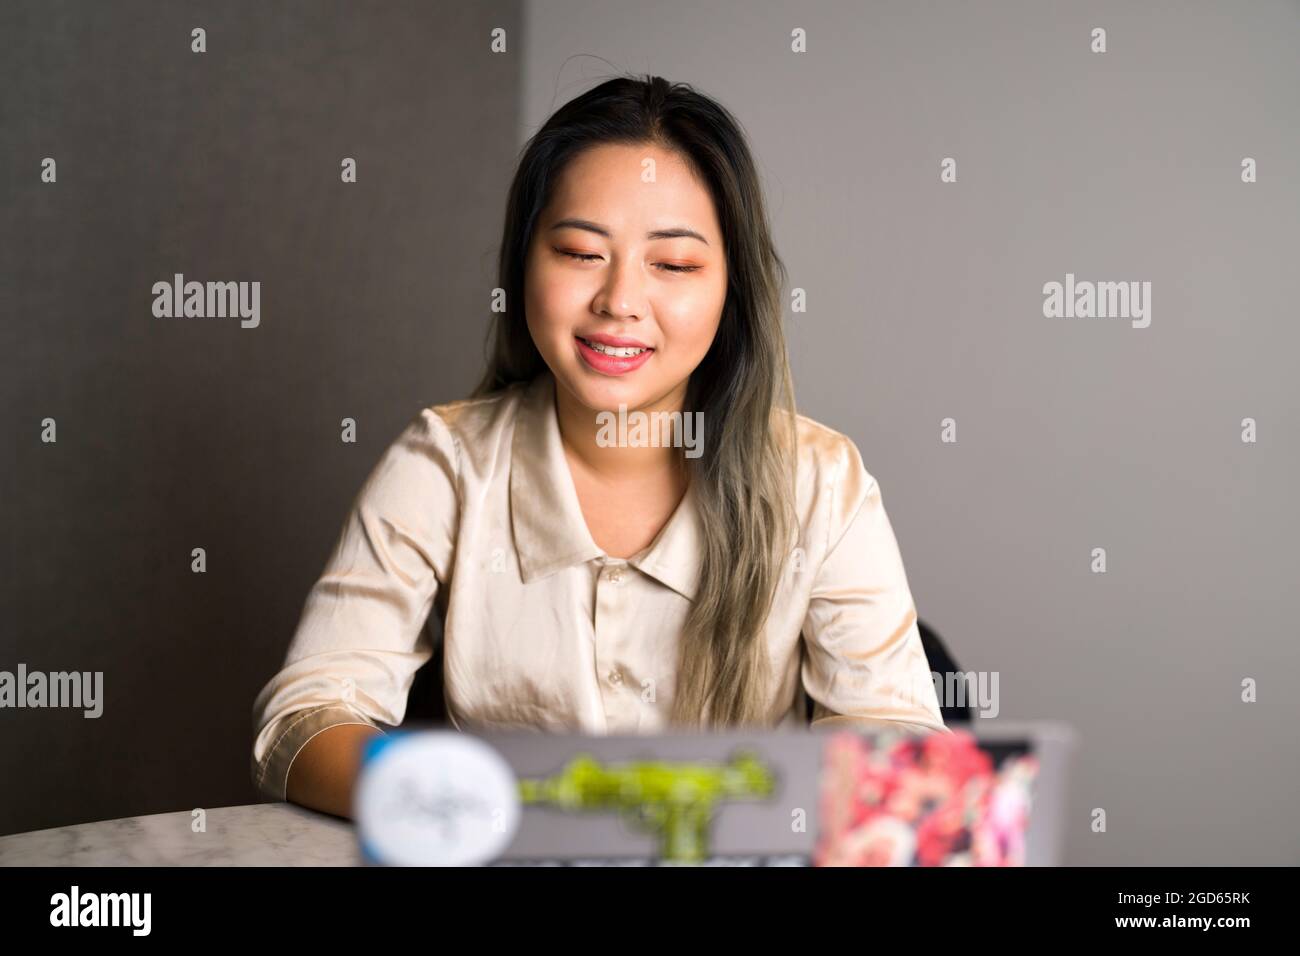 Young Edgy Asian Data Scientist on a Video Conference Stock Photo